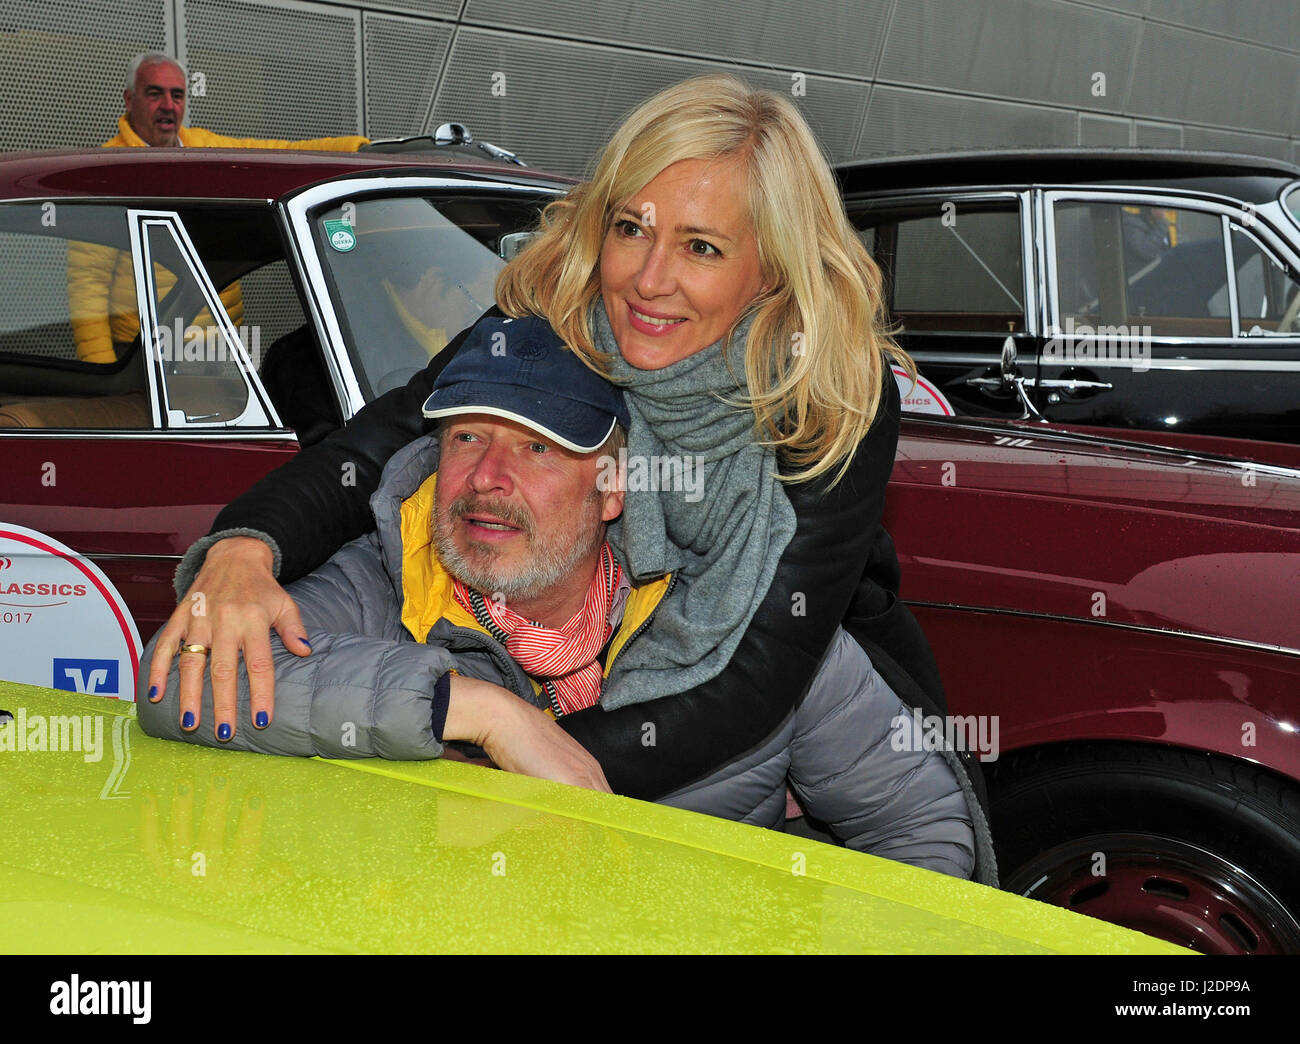 Munich, Germany. 28th Apr, 2017. Actor Axel Milbert and wife Judith at the Arabella Classics Route 2017 in Munich, Germany, 28 April 2017. Money raised by the classic car rally will be donated to the victims of recent flooding in Simbach. Photo: Ursula Düren/dpa/Alamy Live News Stock Photo